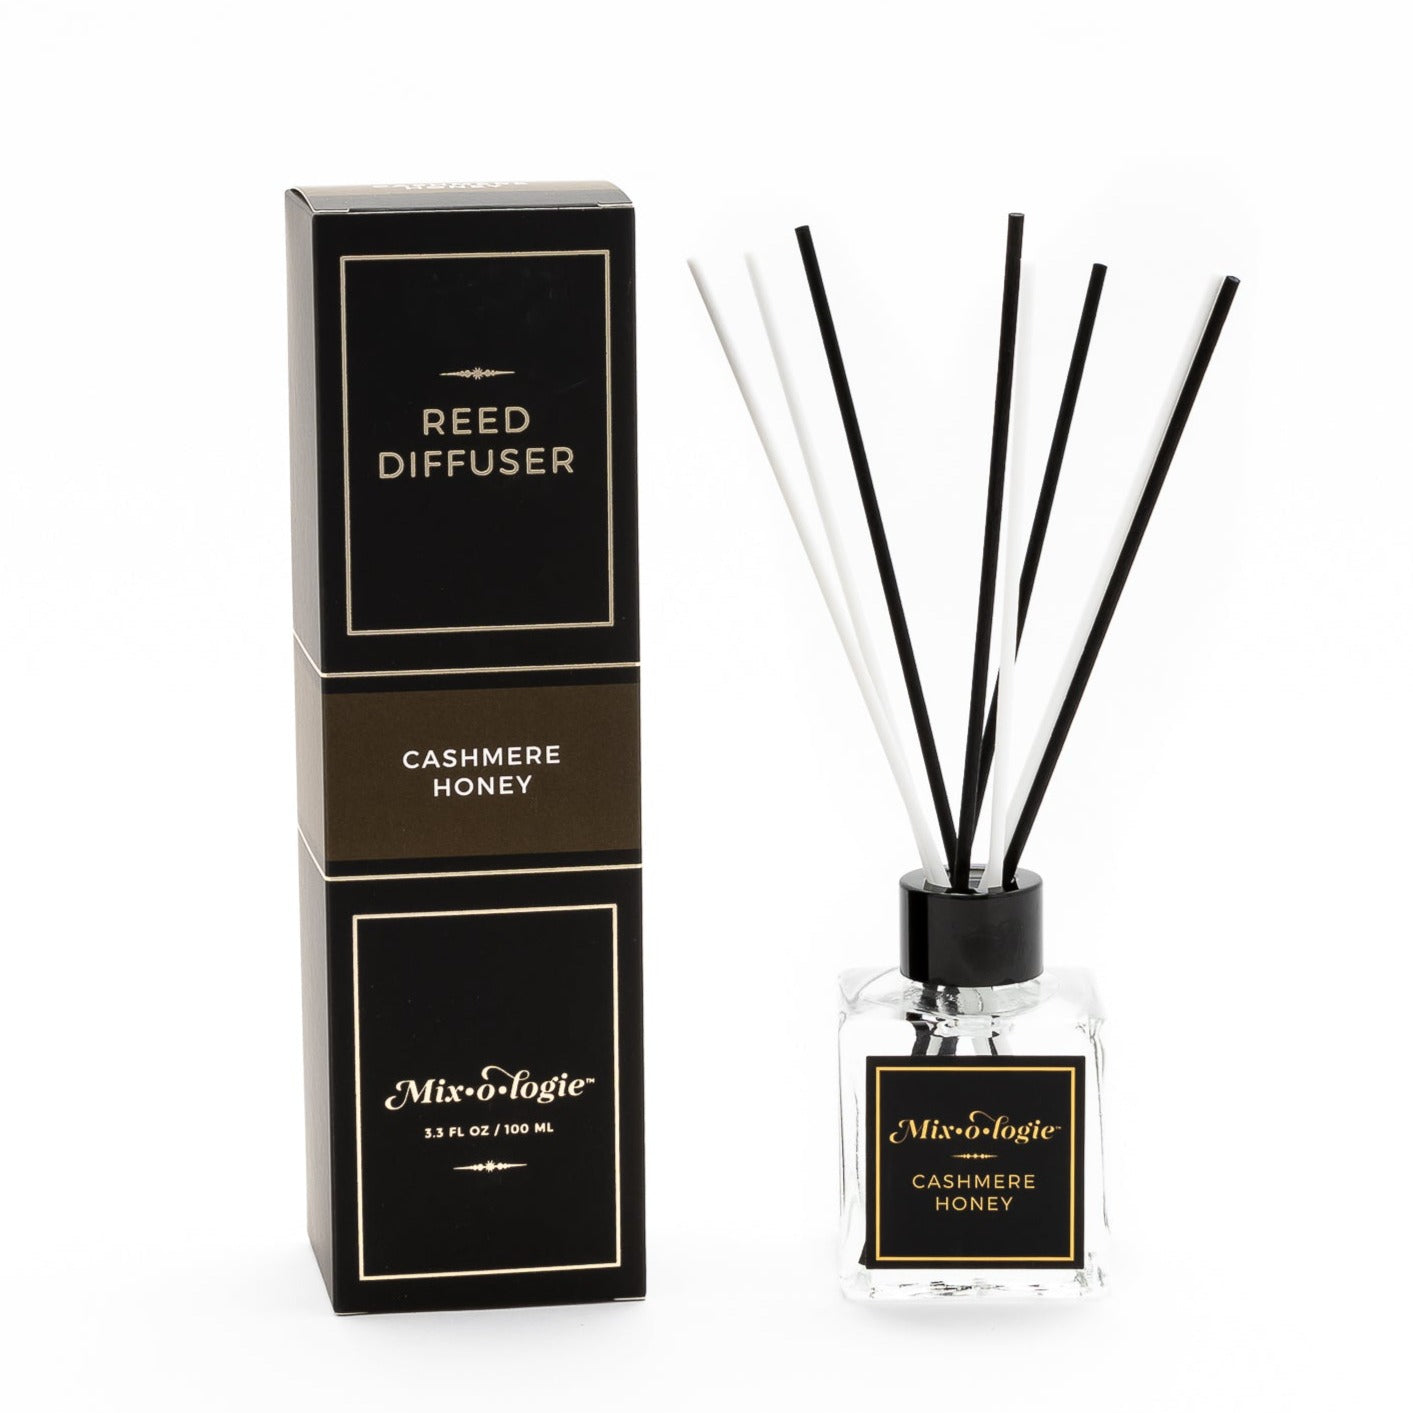 Reed diffuser scented with cashmere honey. 3.3 FL OZ glass bottle with 8 black and white reed diffuser sticks.